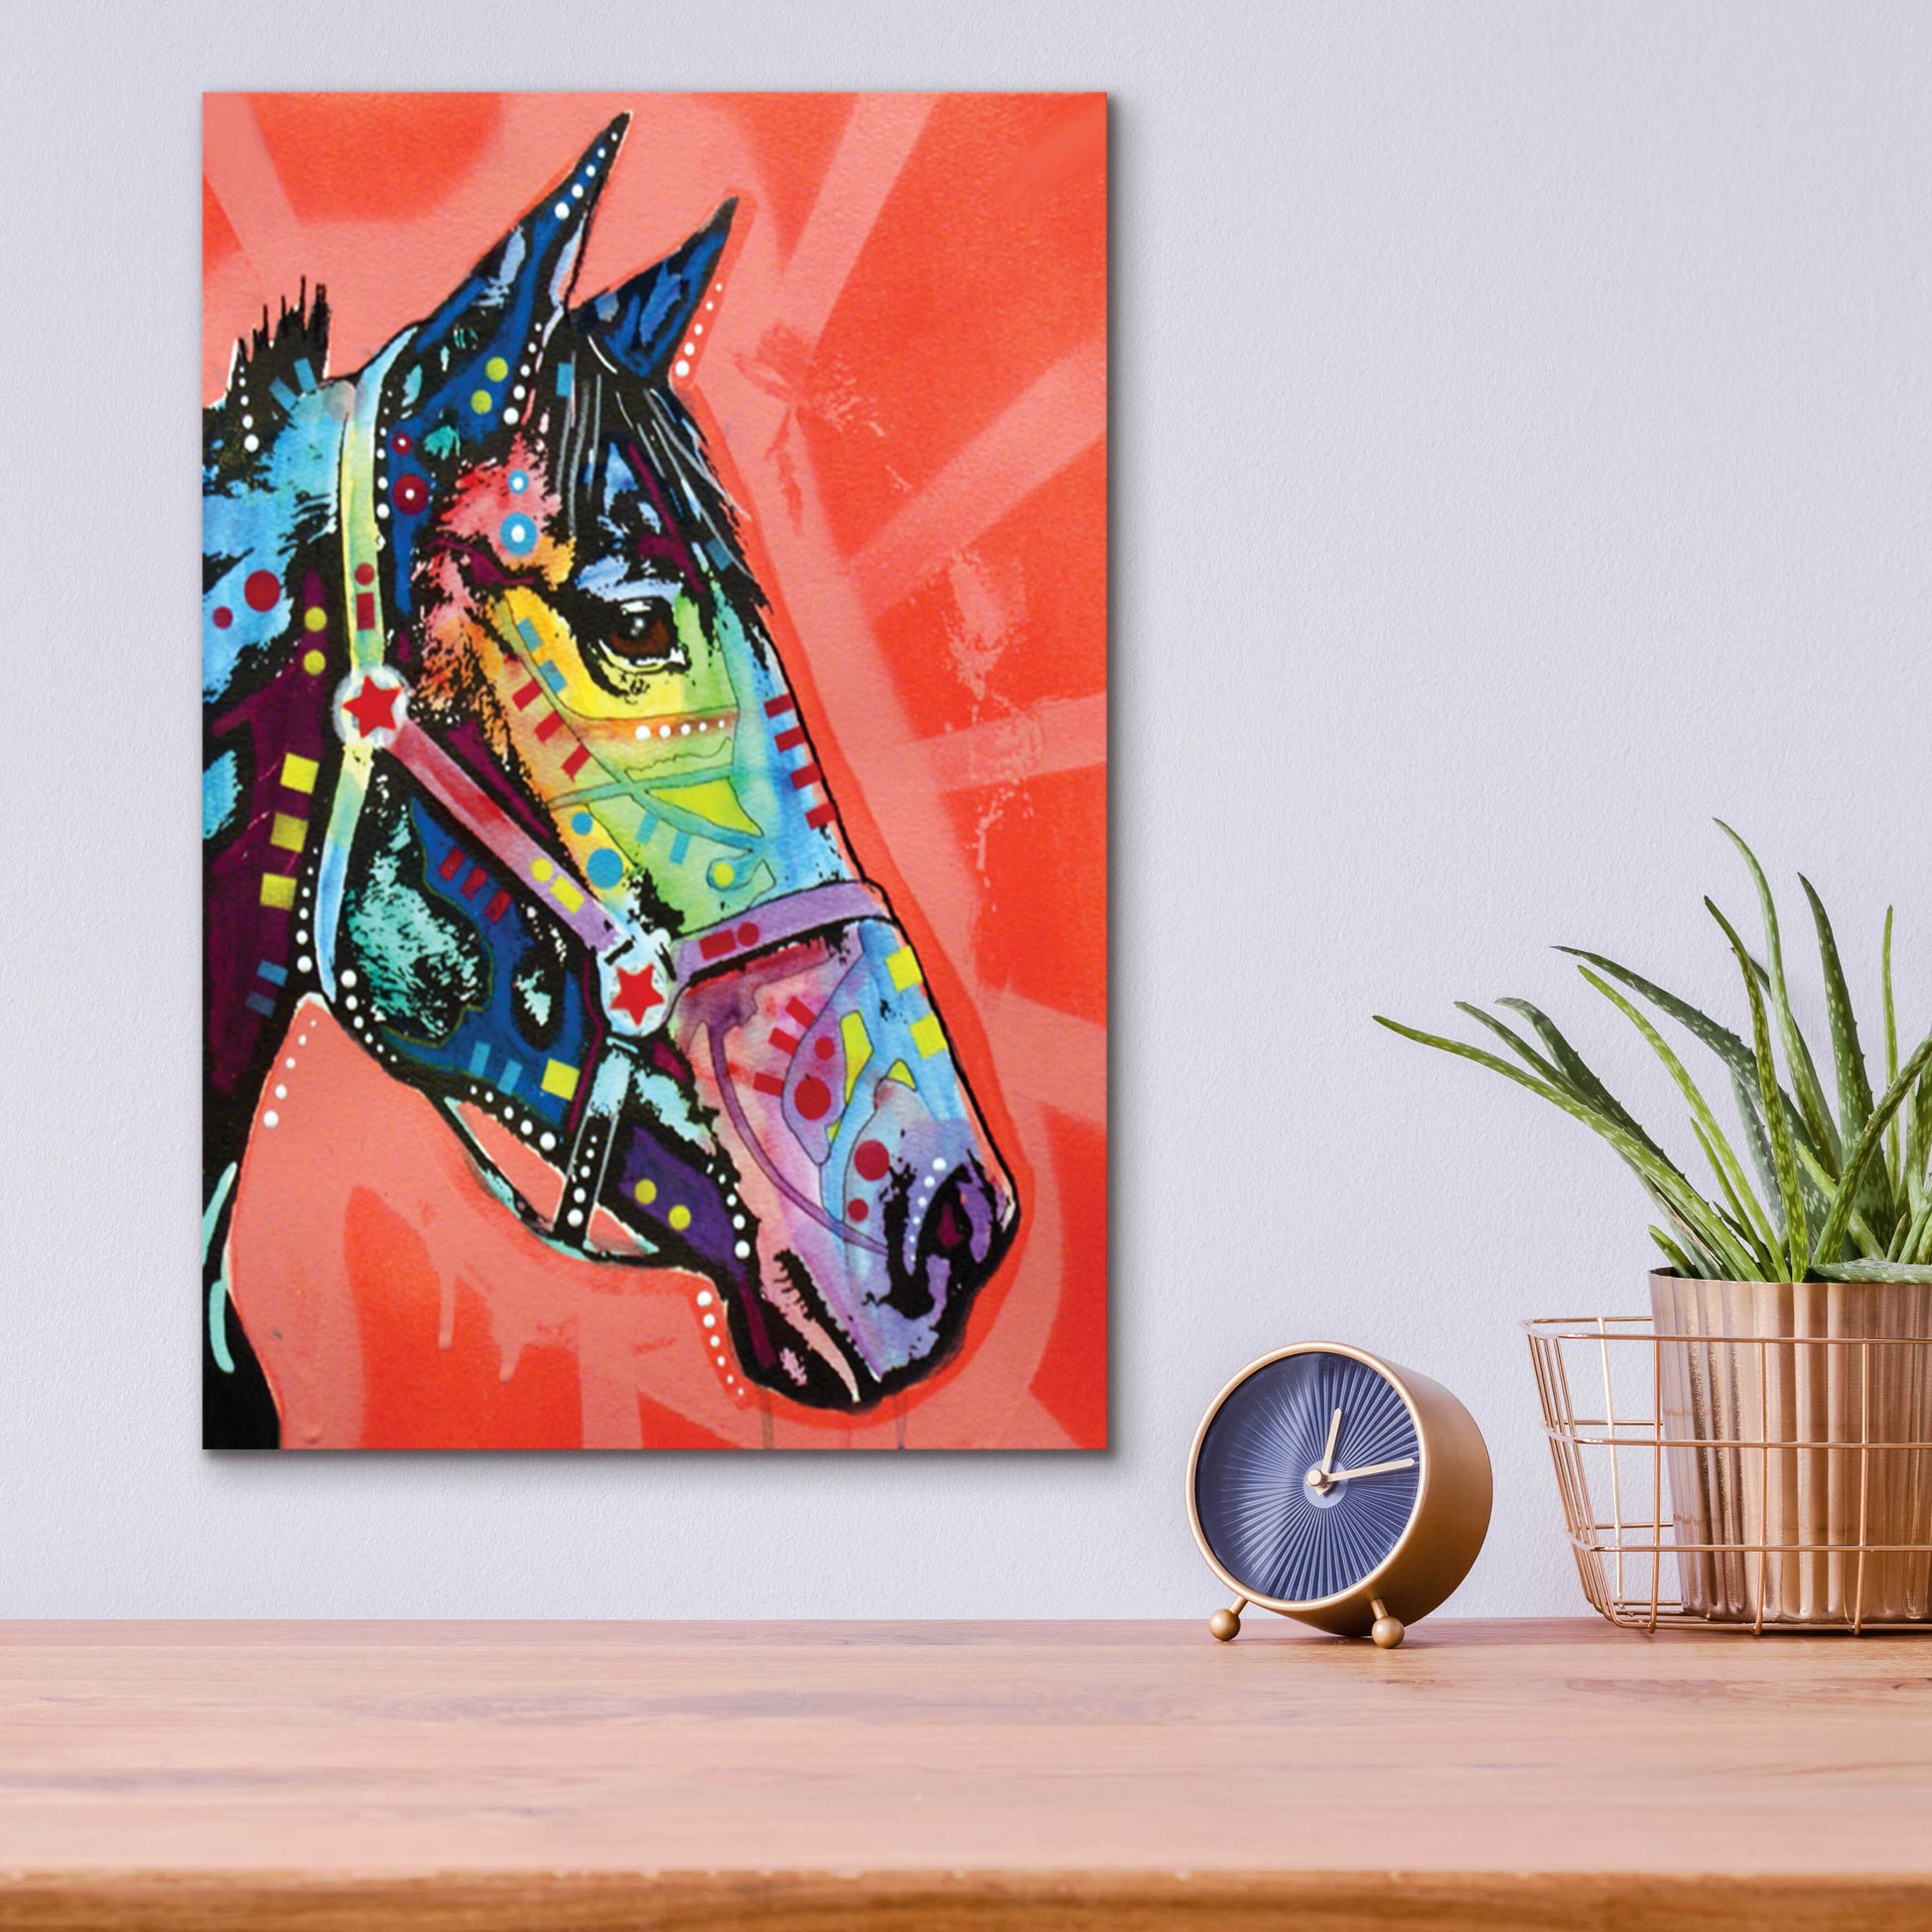 Epic Art 'Wc Horse 3' by Dean Russo, Acrylic Glass Wall Art,12x16